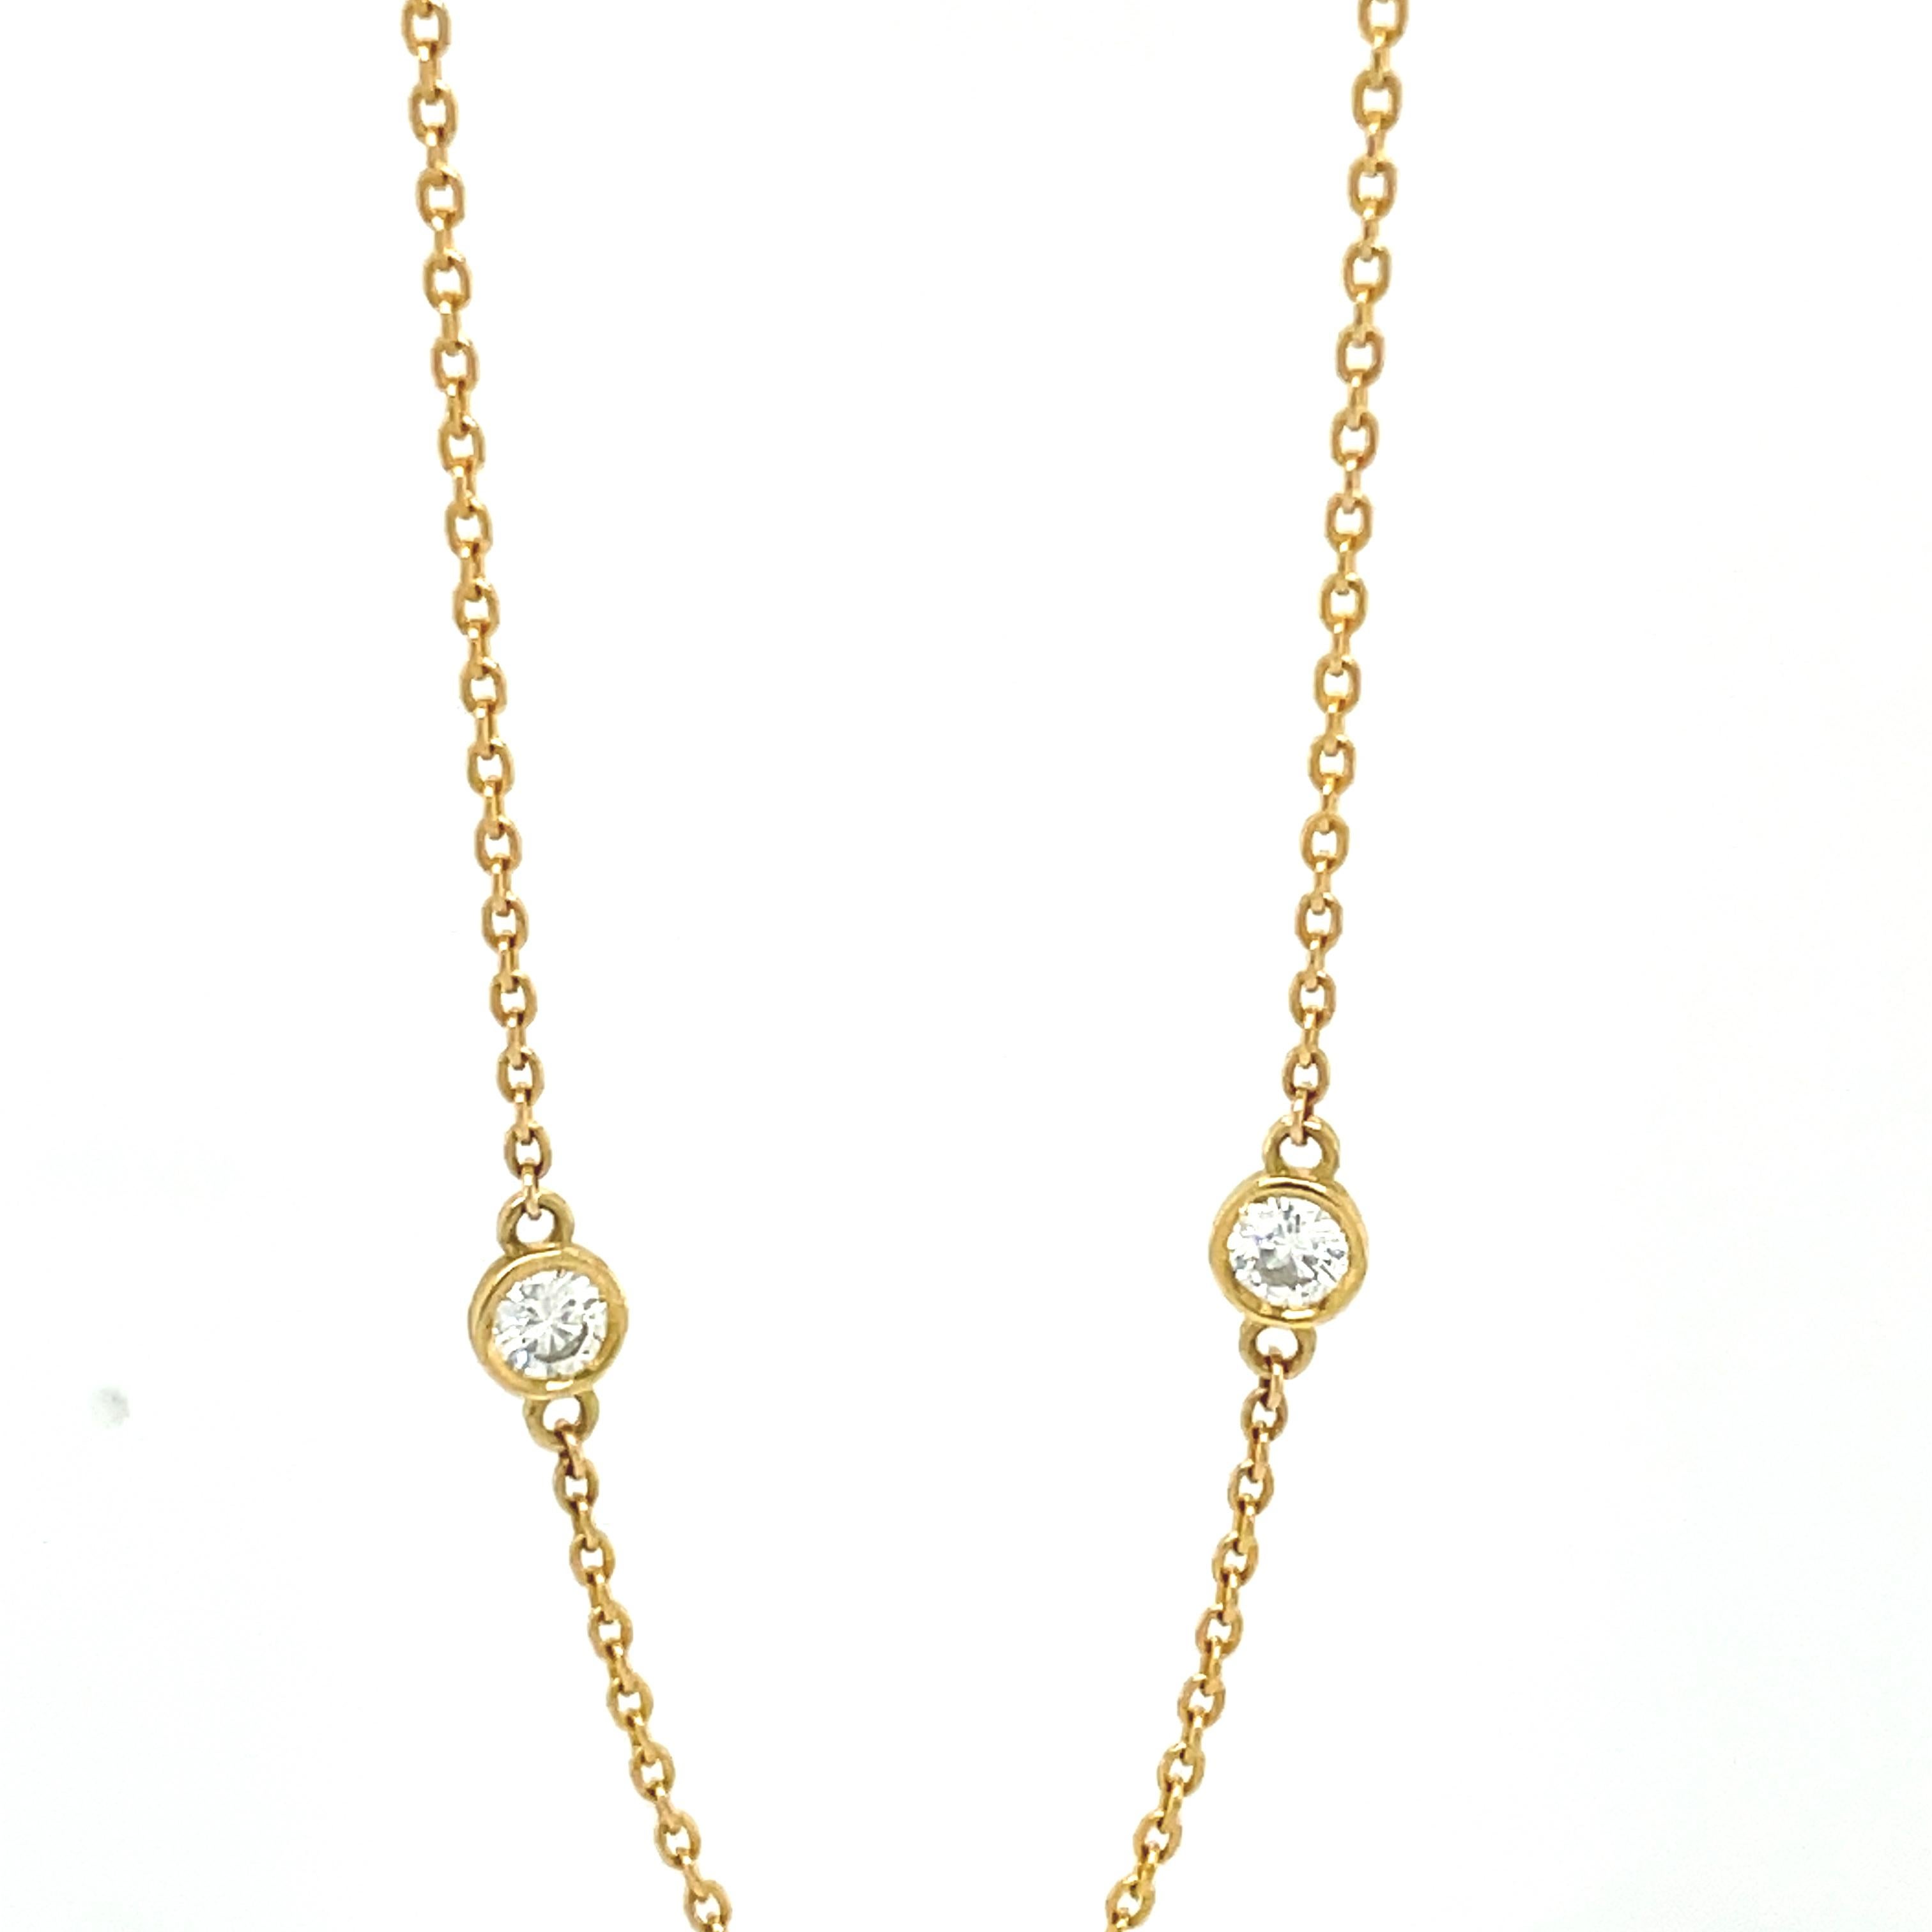 Women's Gems Are Forever Diamonds by the Yard 8 Round Bezel Necklace in 18k Yellow Gold For Sale